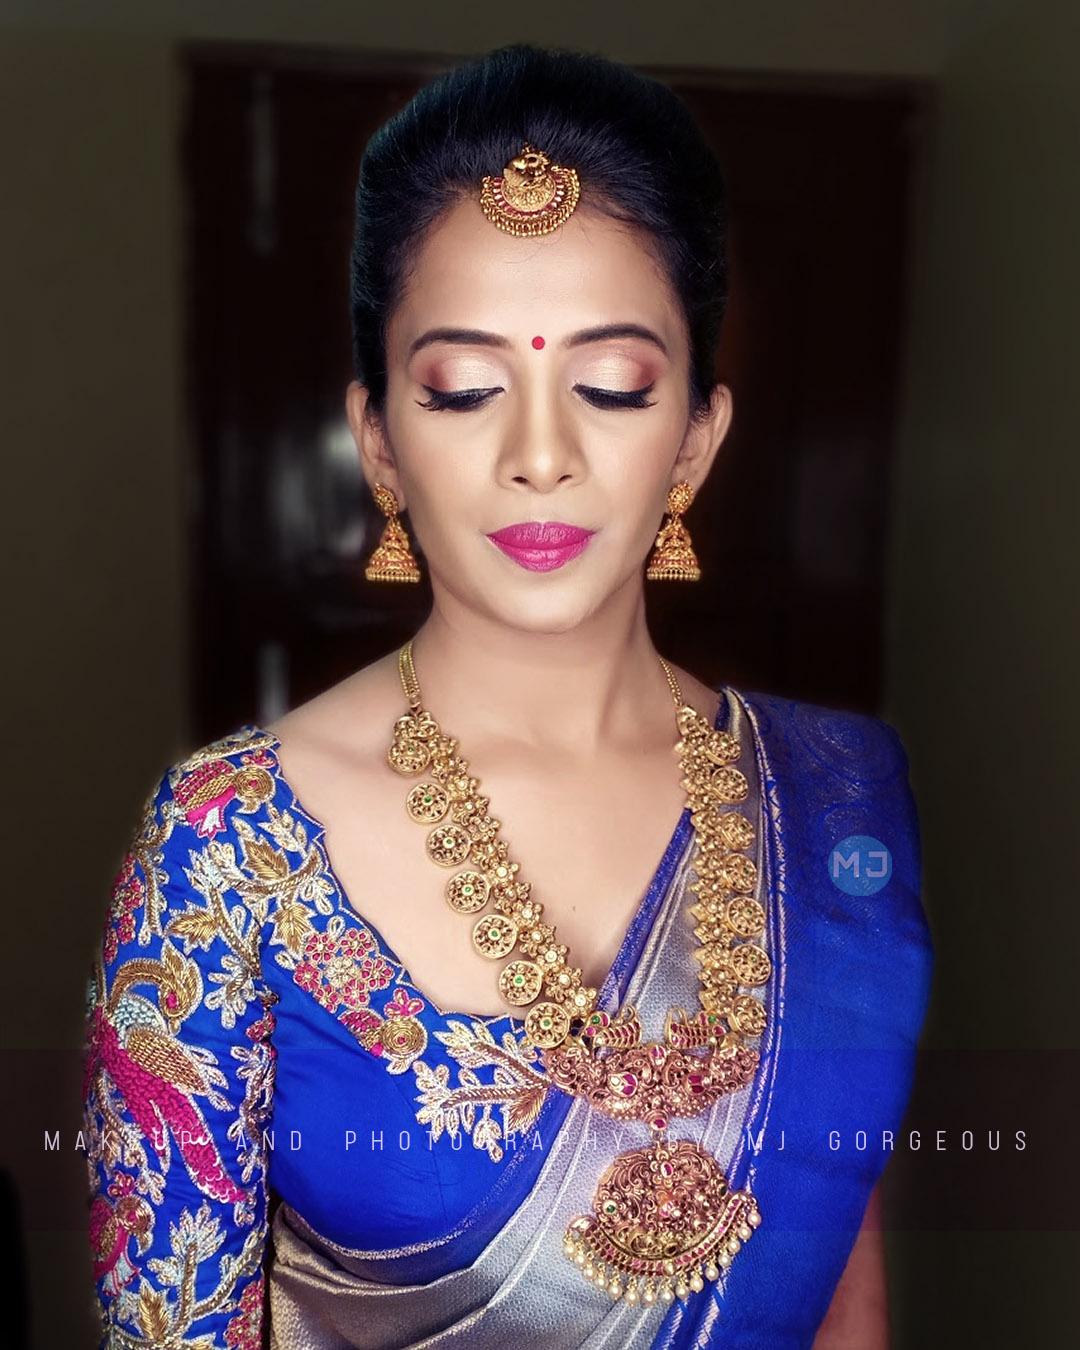 The new trend of south indian bride